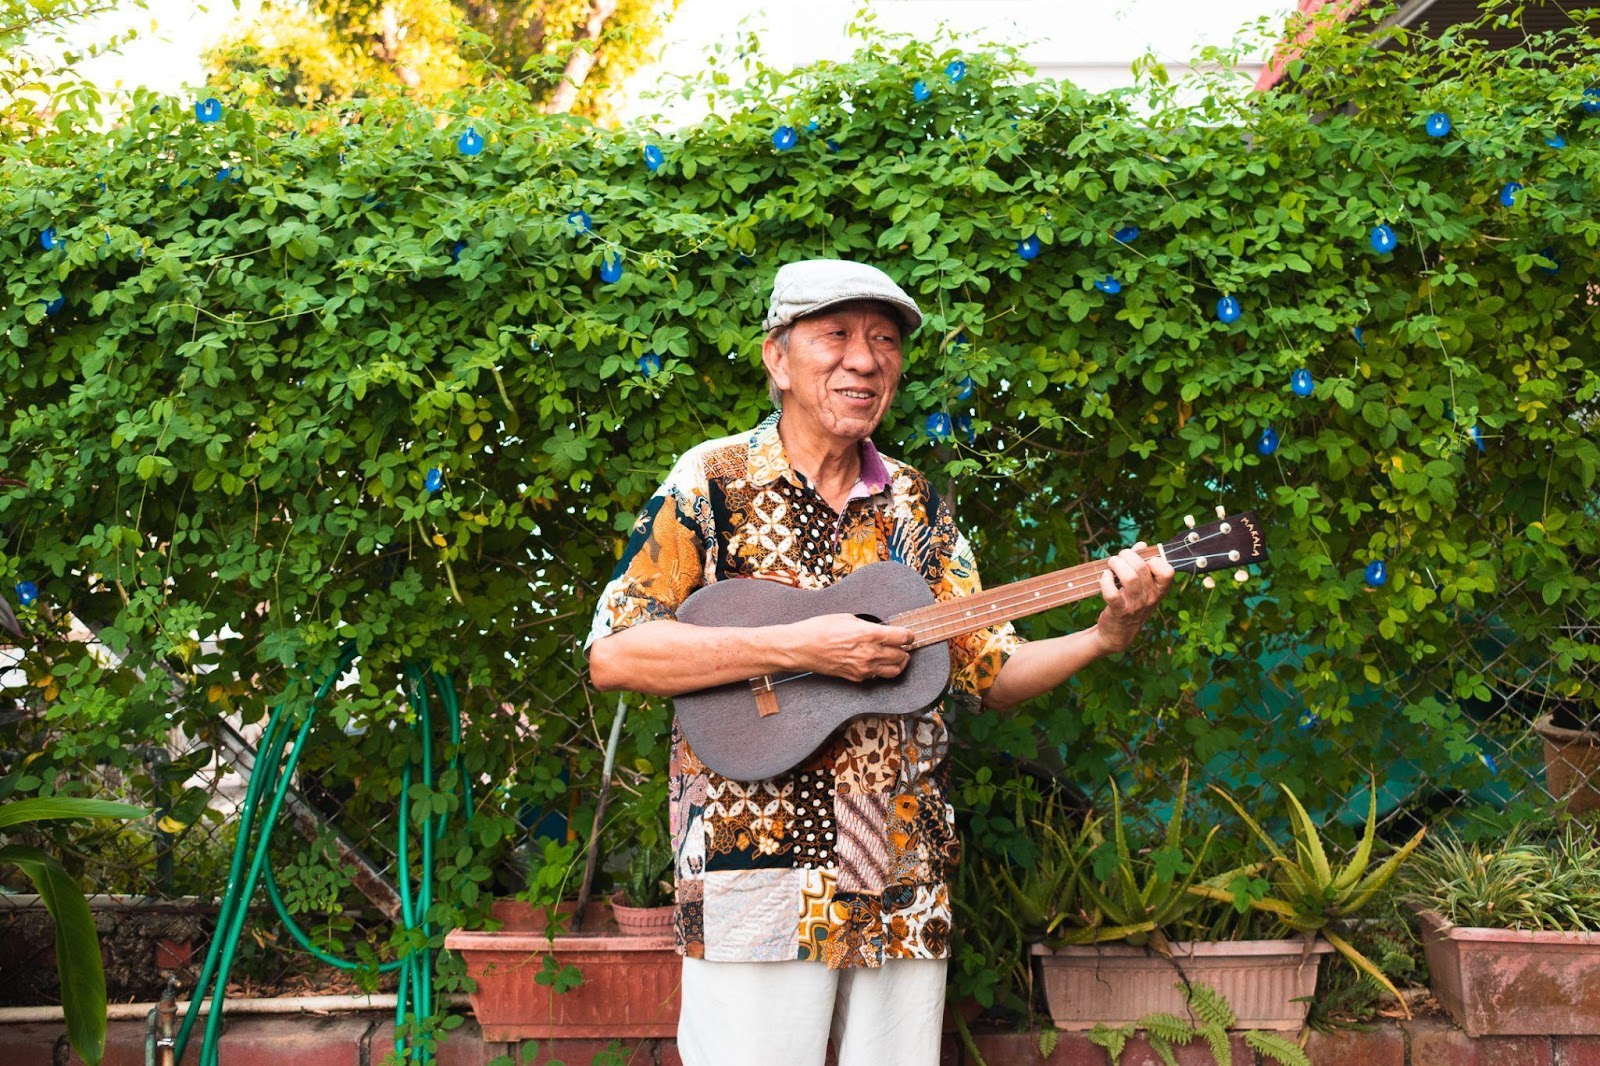 Chair Yoga, Ukuleles, and IT Classes: Is This What It Means to Rewire in Retirement?